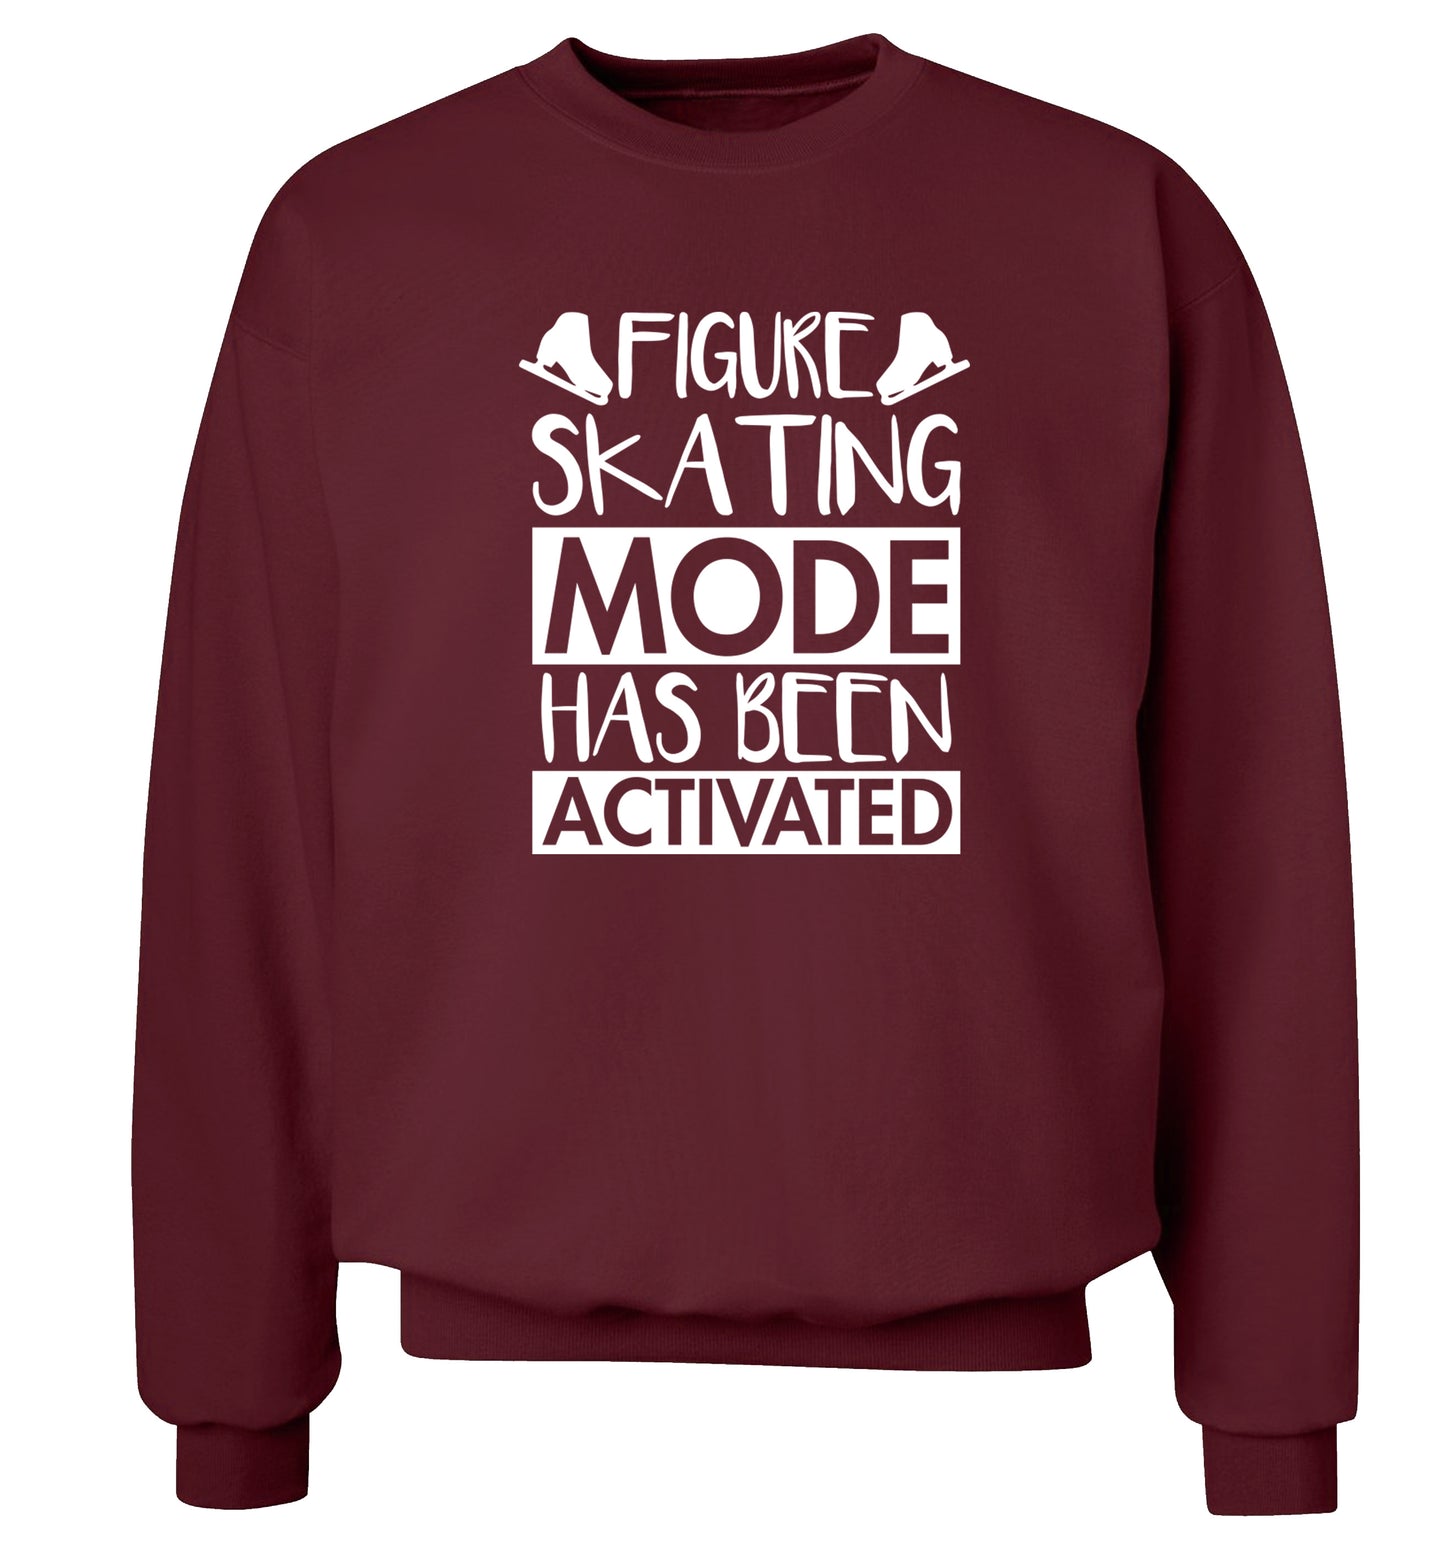 Figure skating mode activated Adult's unisexmaroon Sweater 2XL